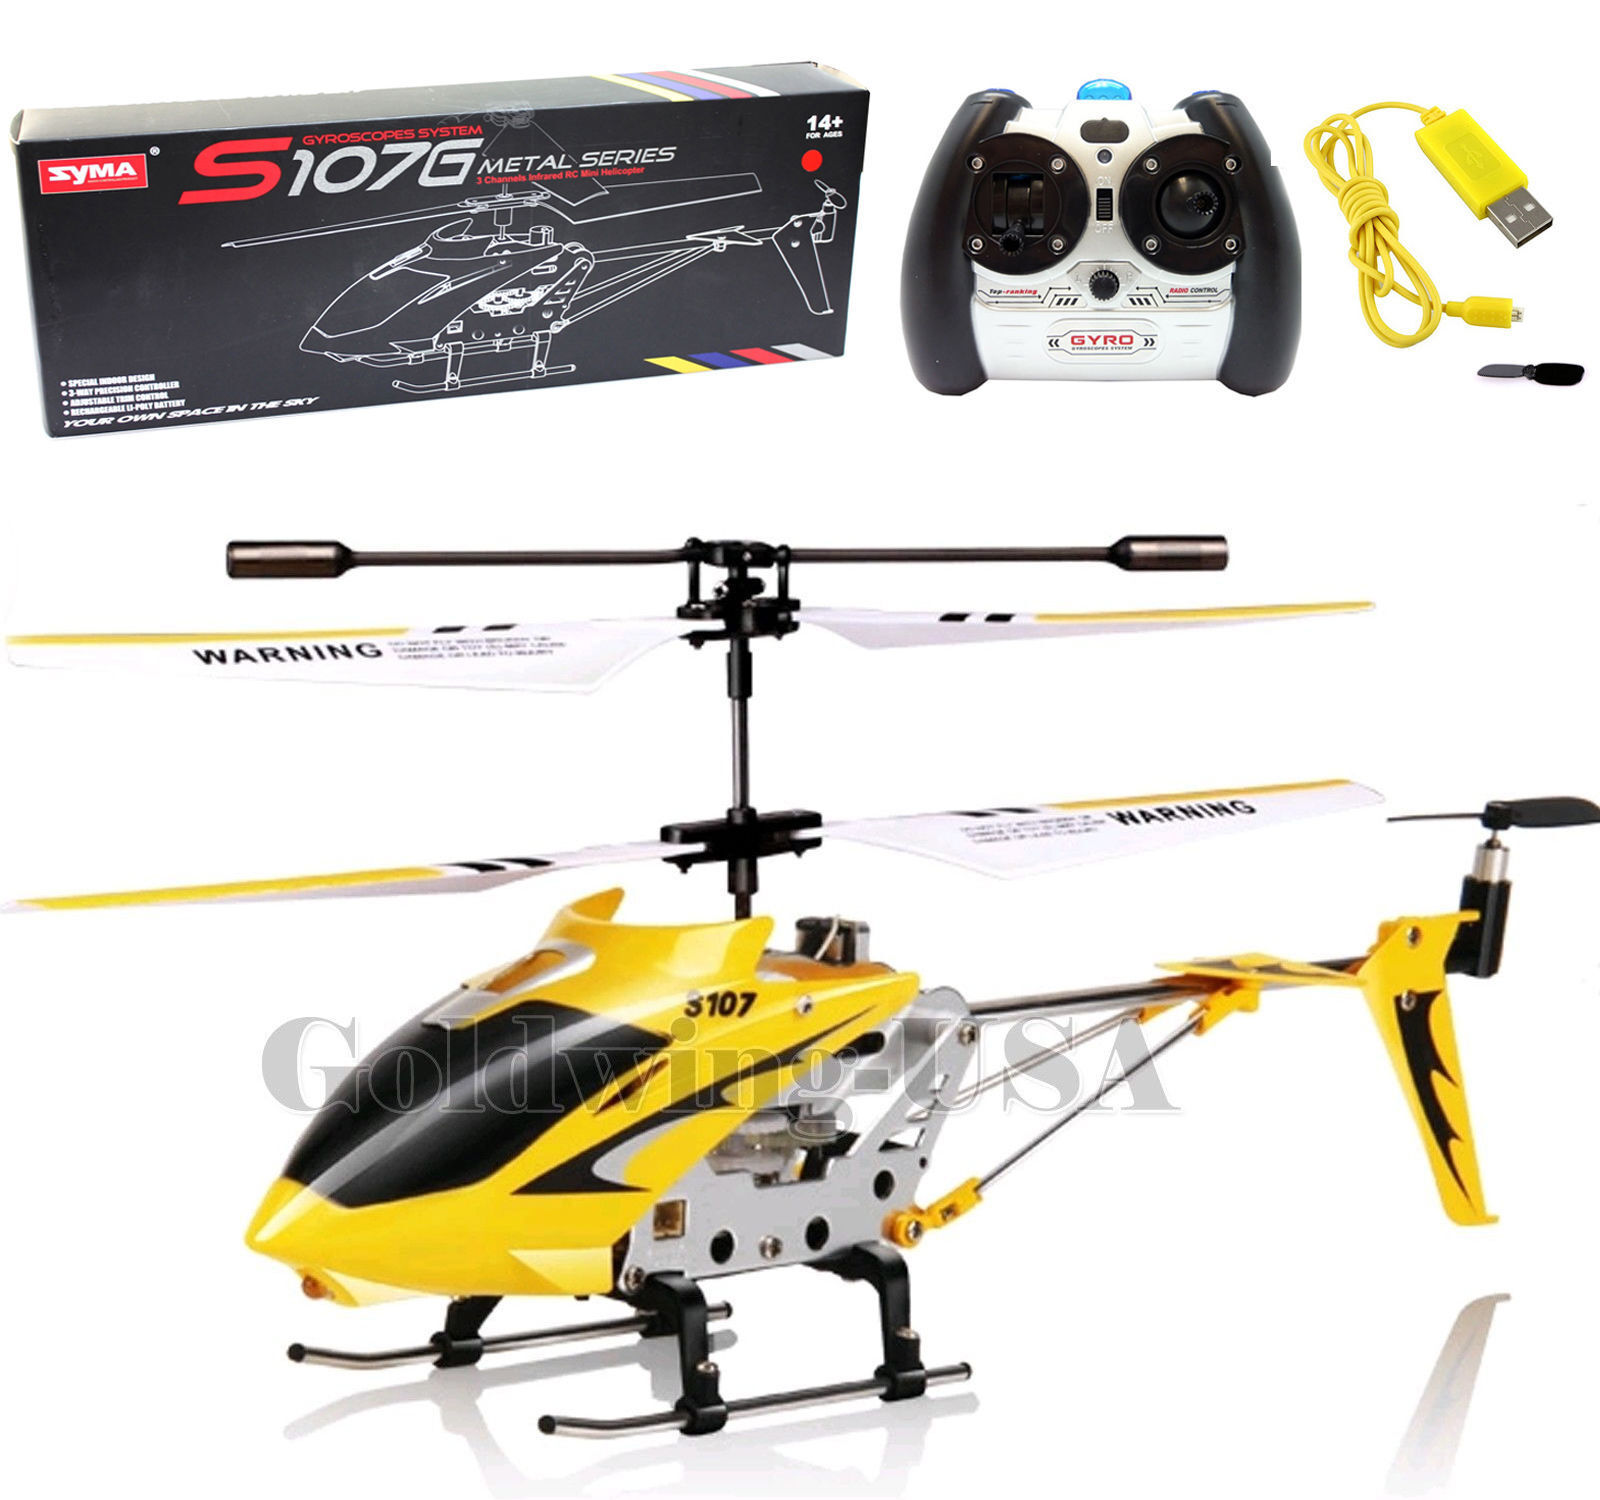 Direct factory Cheerwing S107G RC Helicopter 3.5CH Mini Metal Remote Control GYRO Kids Gift